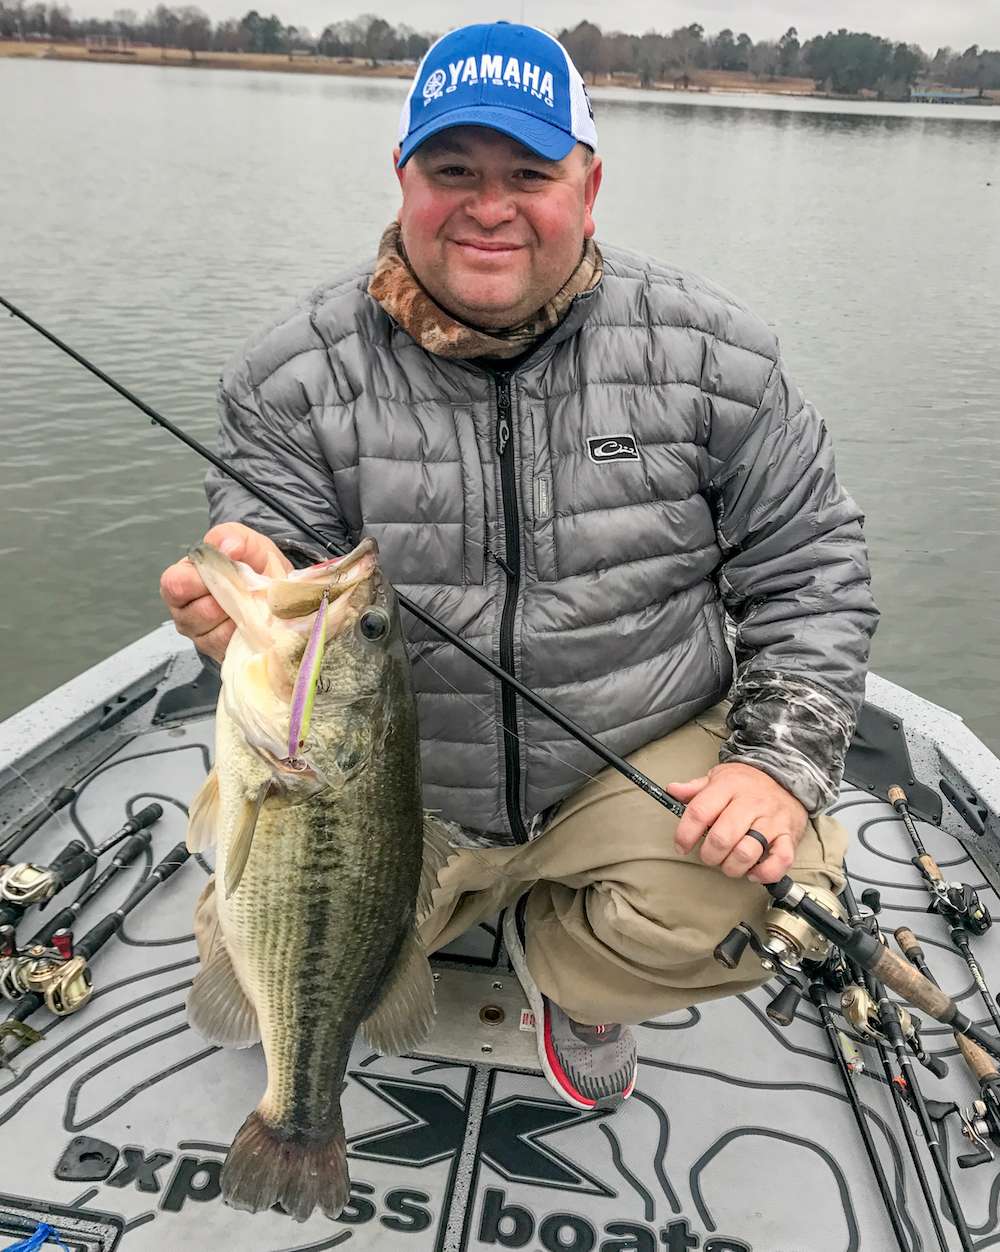 <b>9:58 a.m.</b> After what seems like an eternity, Lowen works the tiring lunker to boatside and hoists aboard his first keeper of the day, a spectacular Â­7-pound, 1-ounce largemouth!
